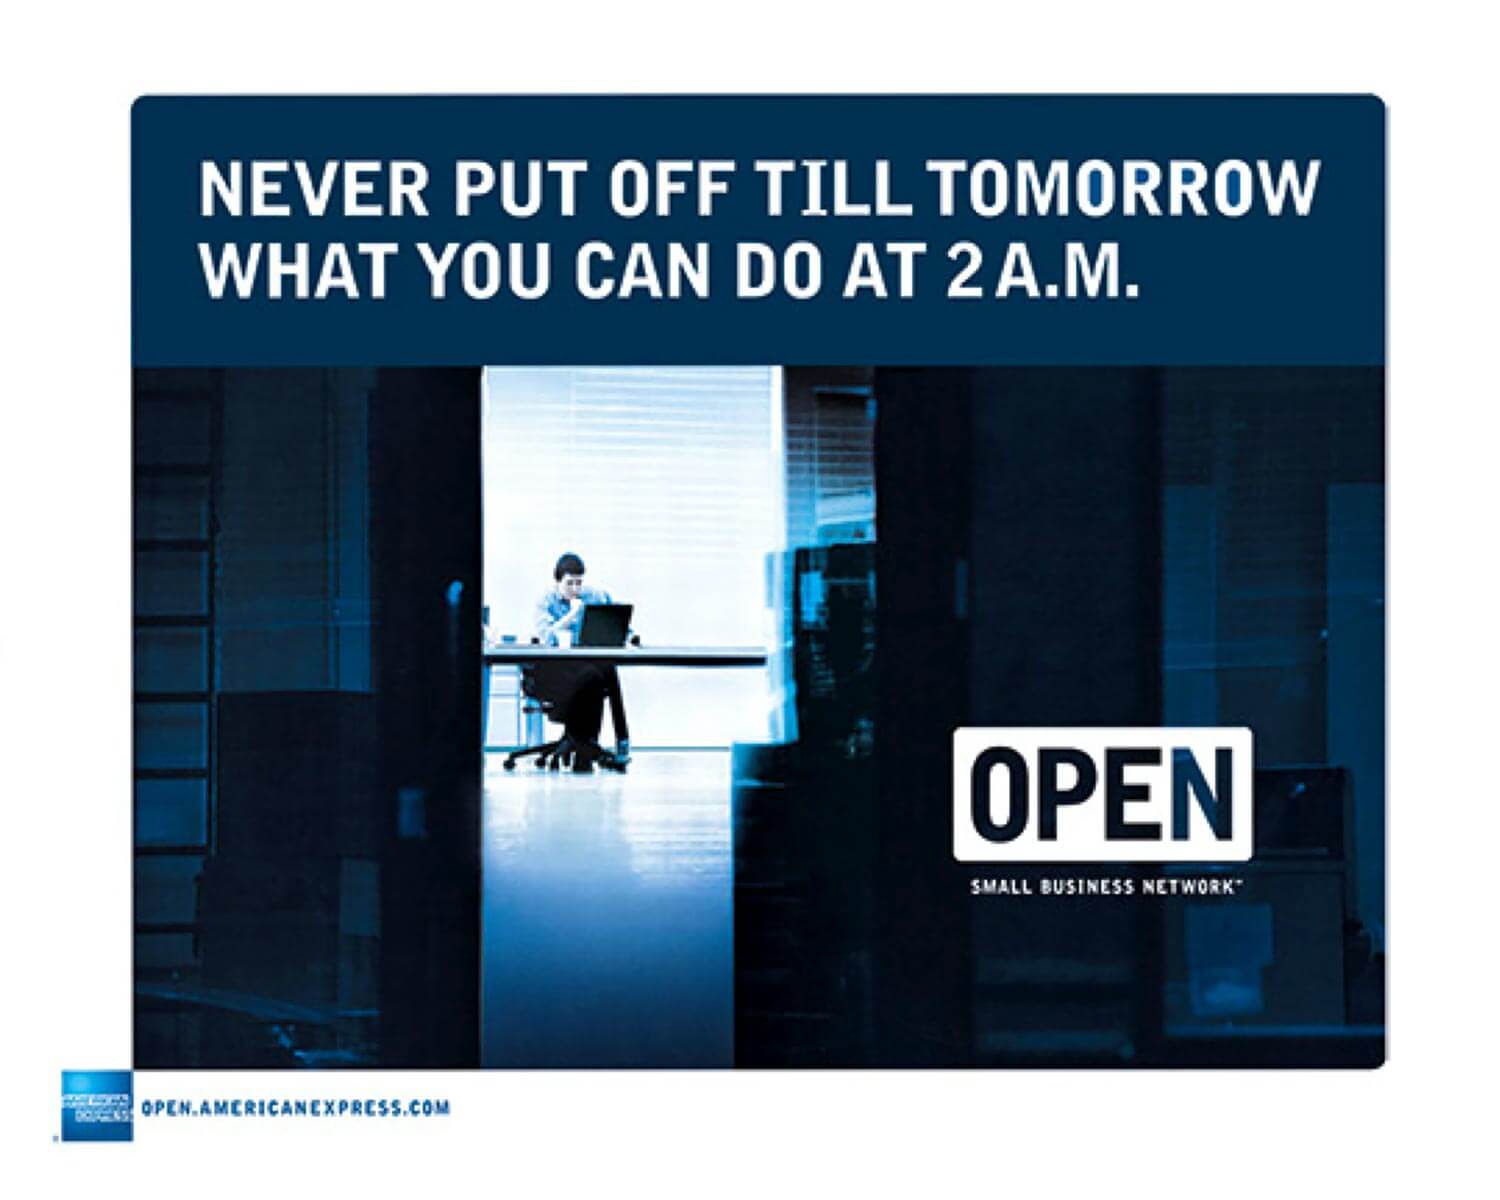 American Express. Open. Small Business Network.